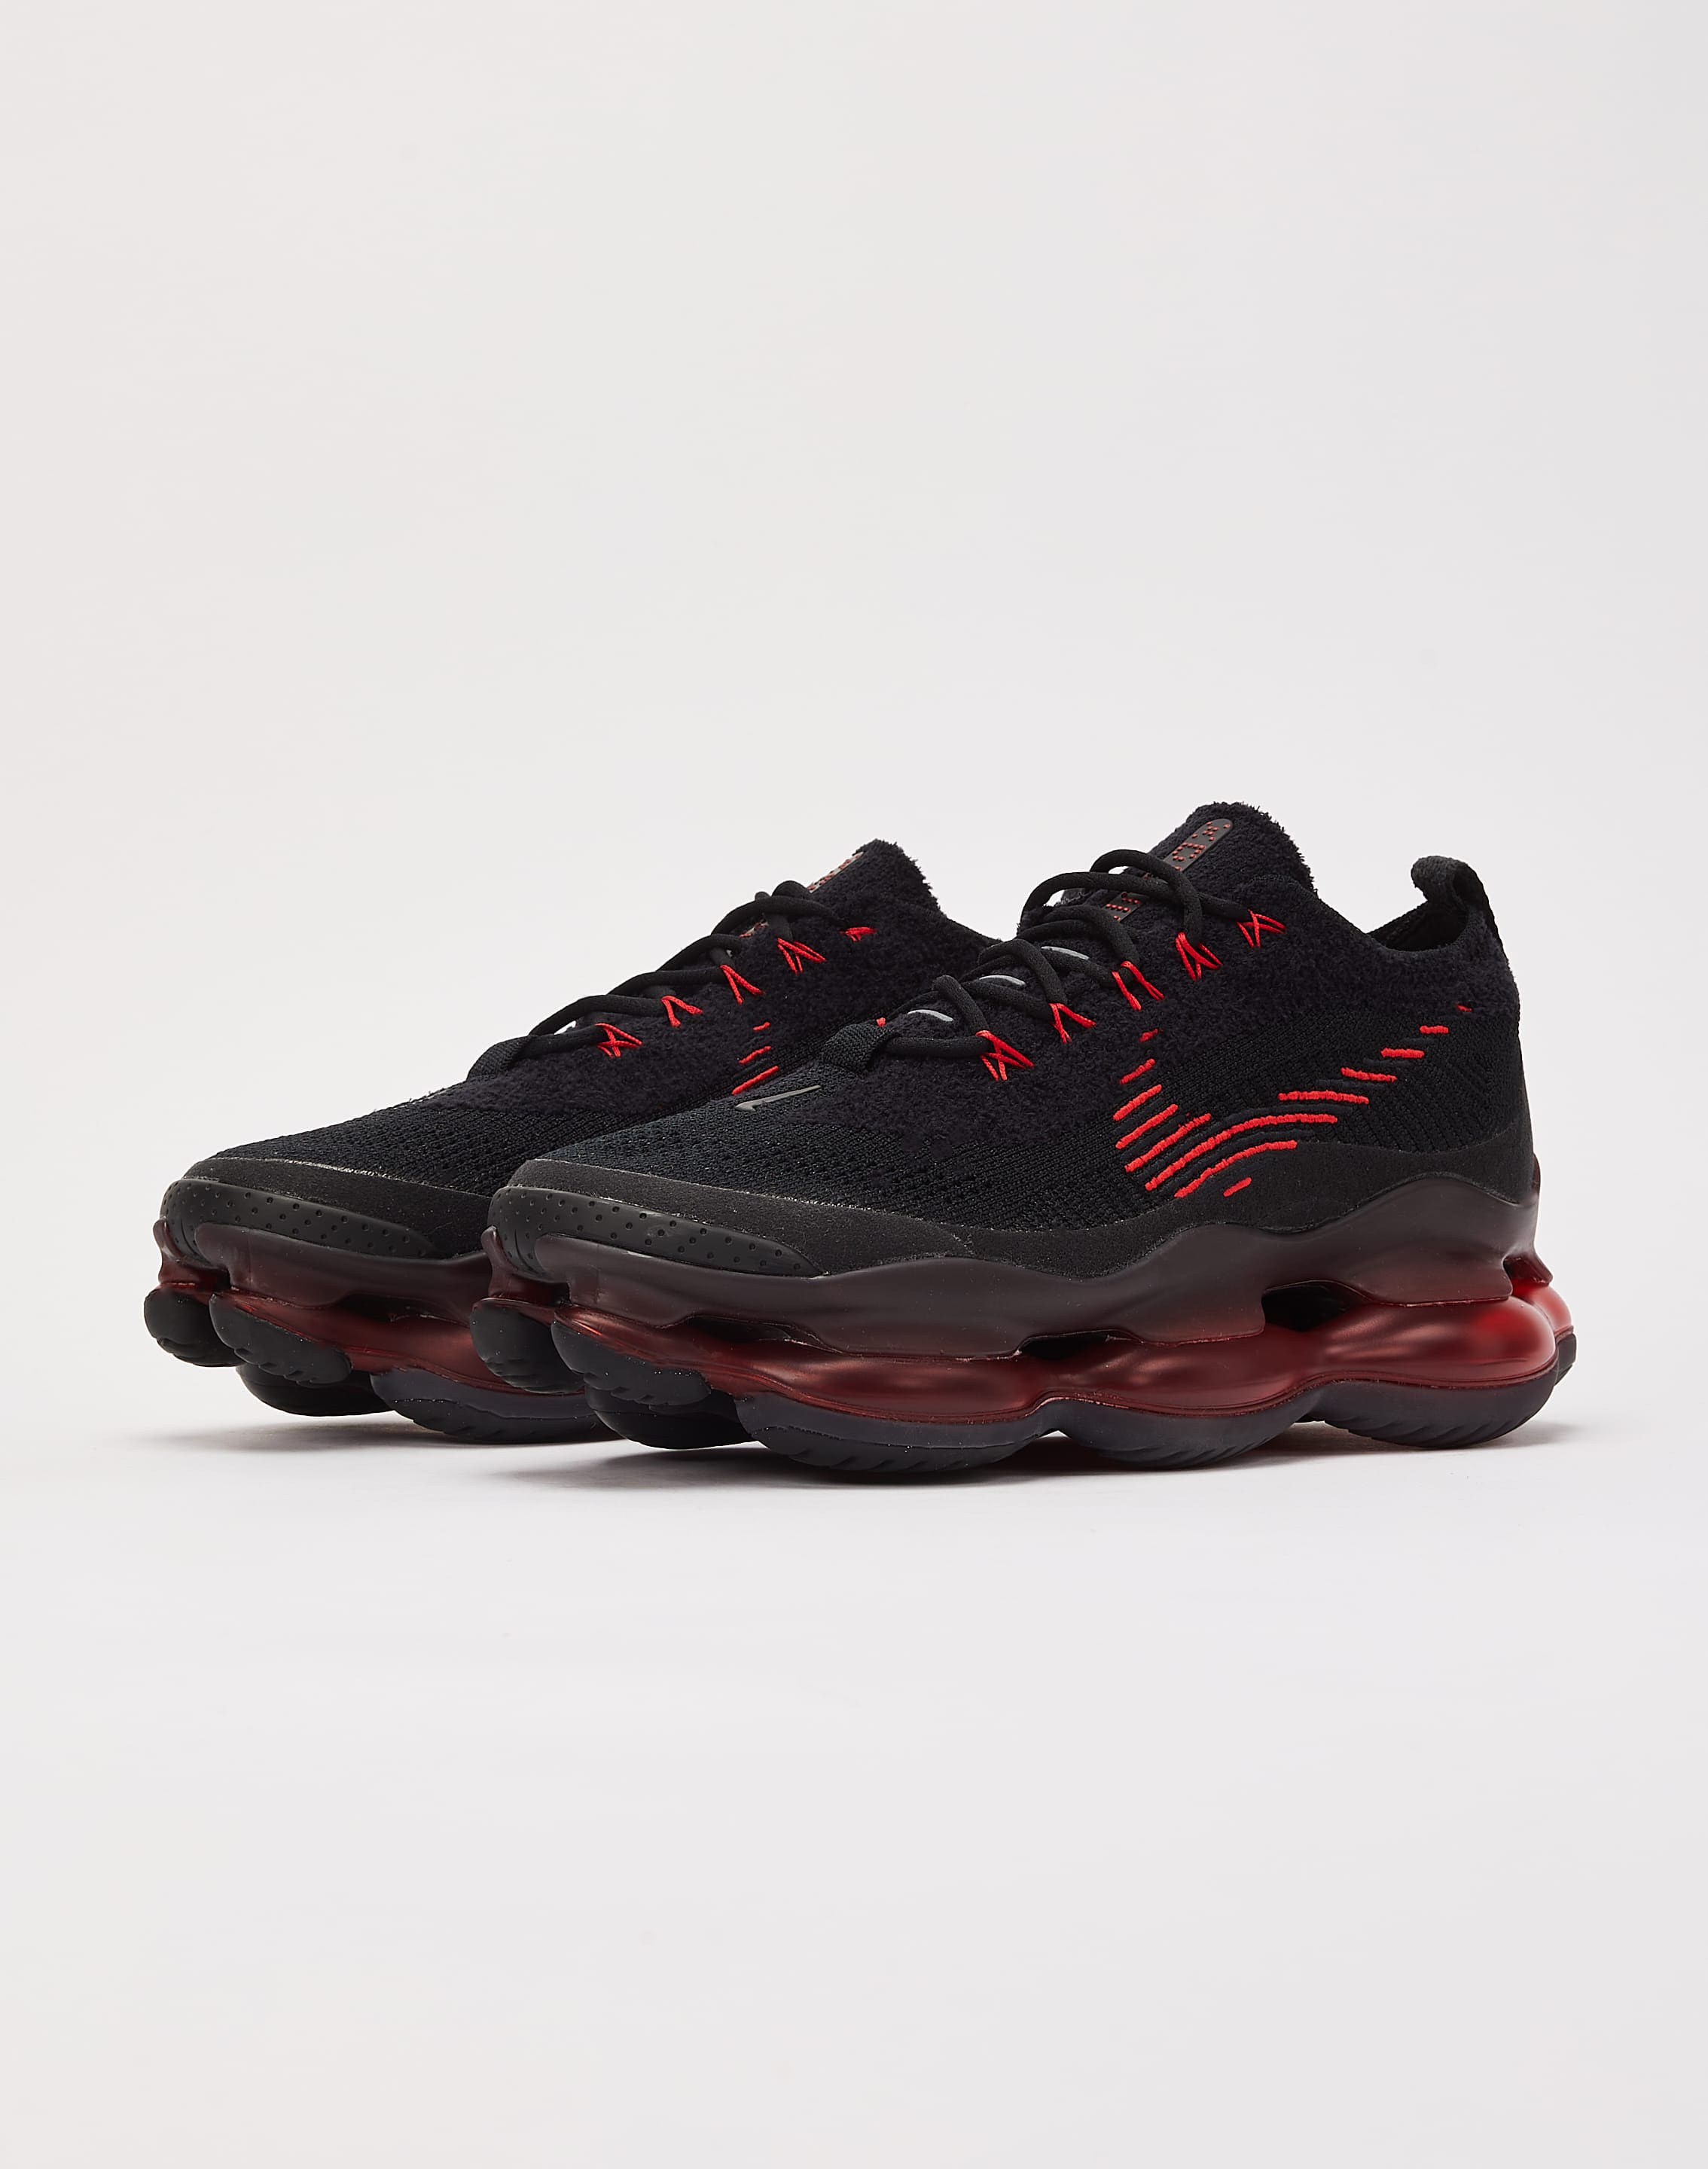 Nike Air Max Scorpion Flyknit – DTLR